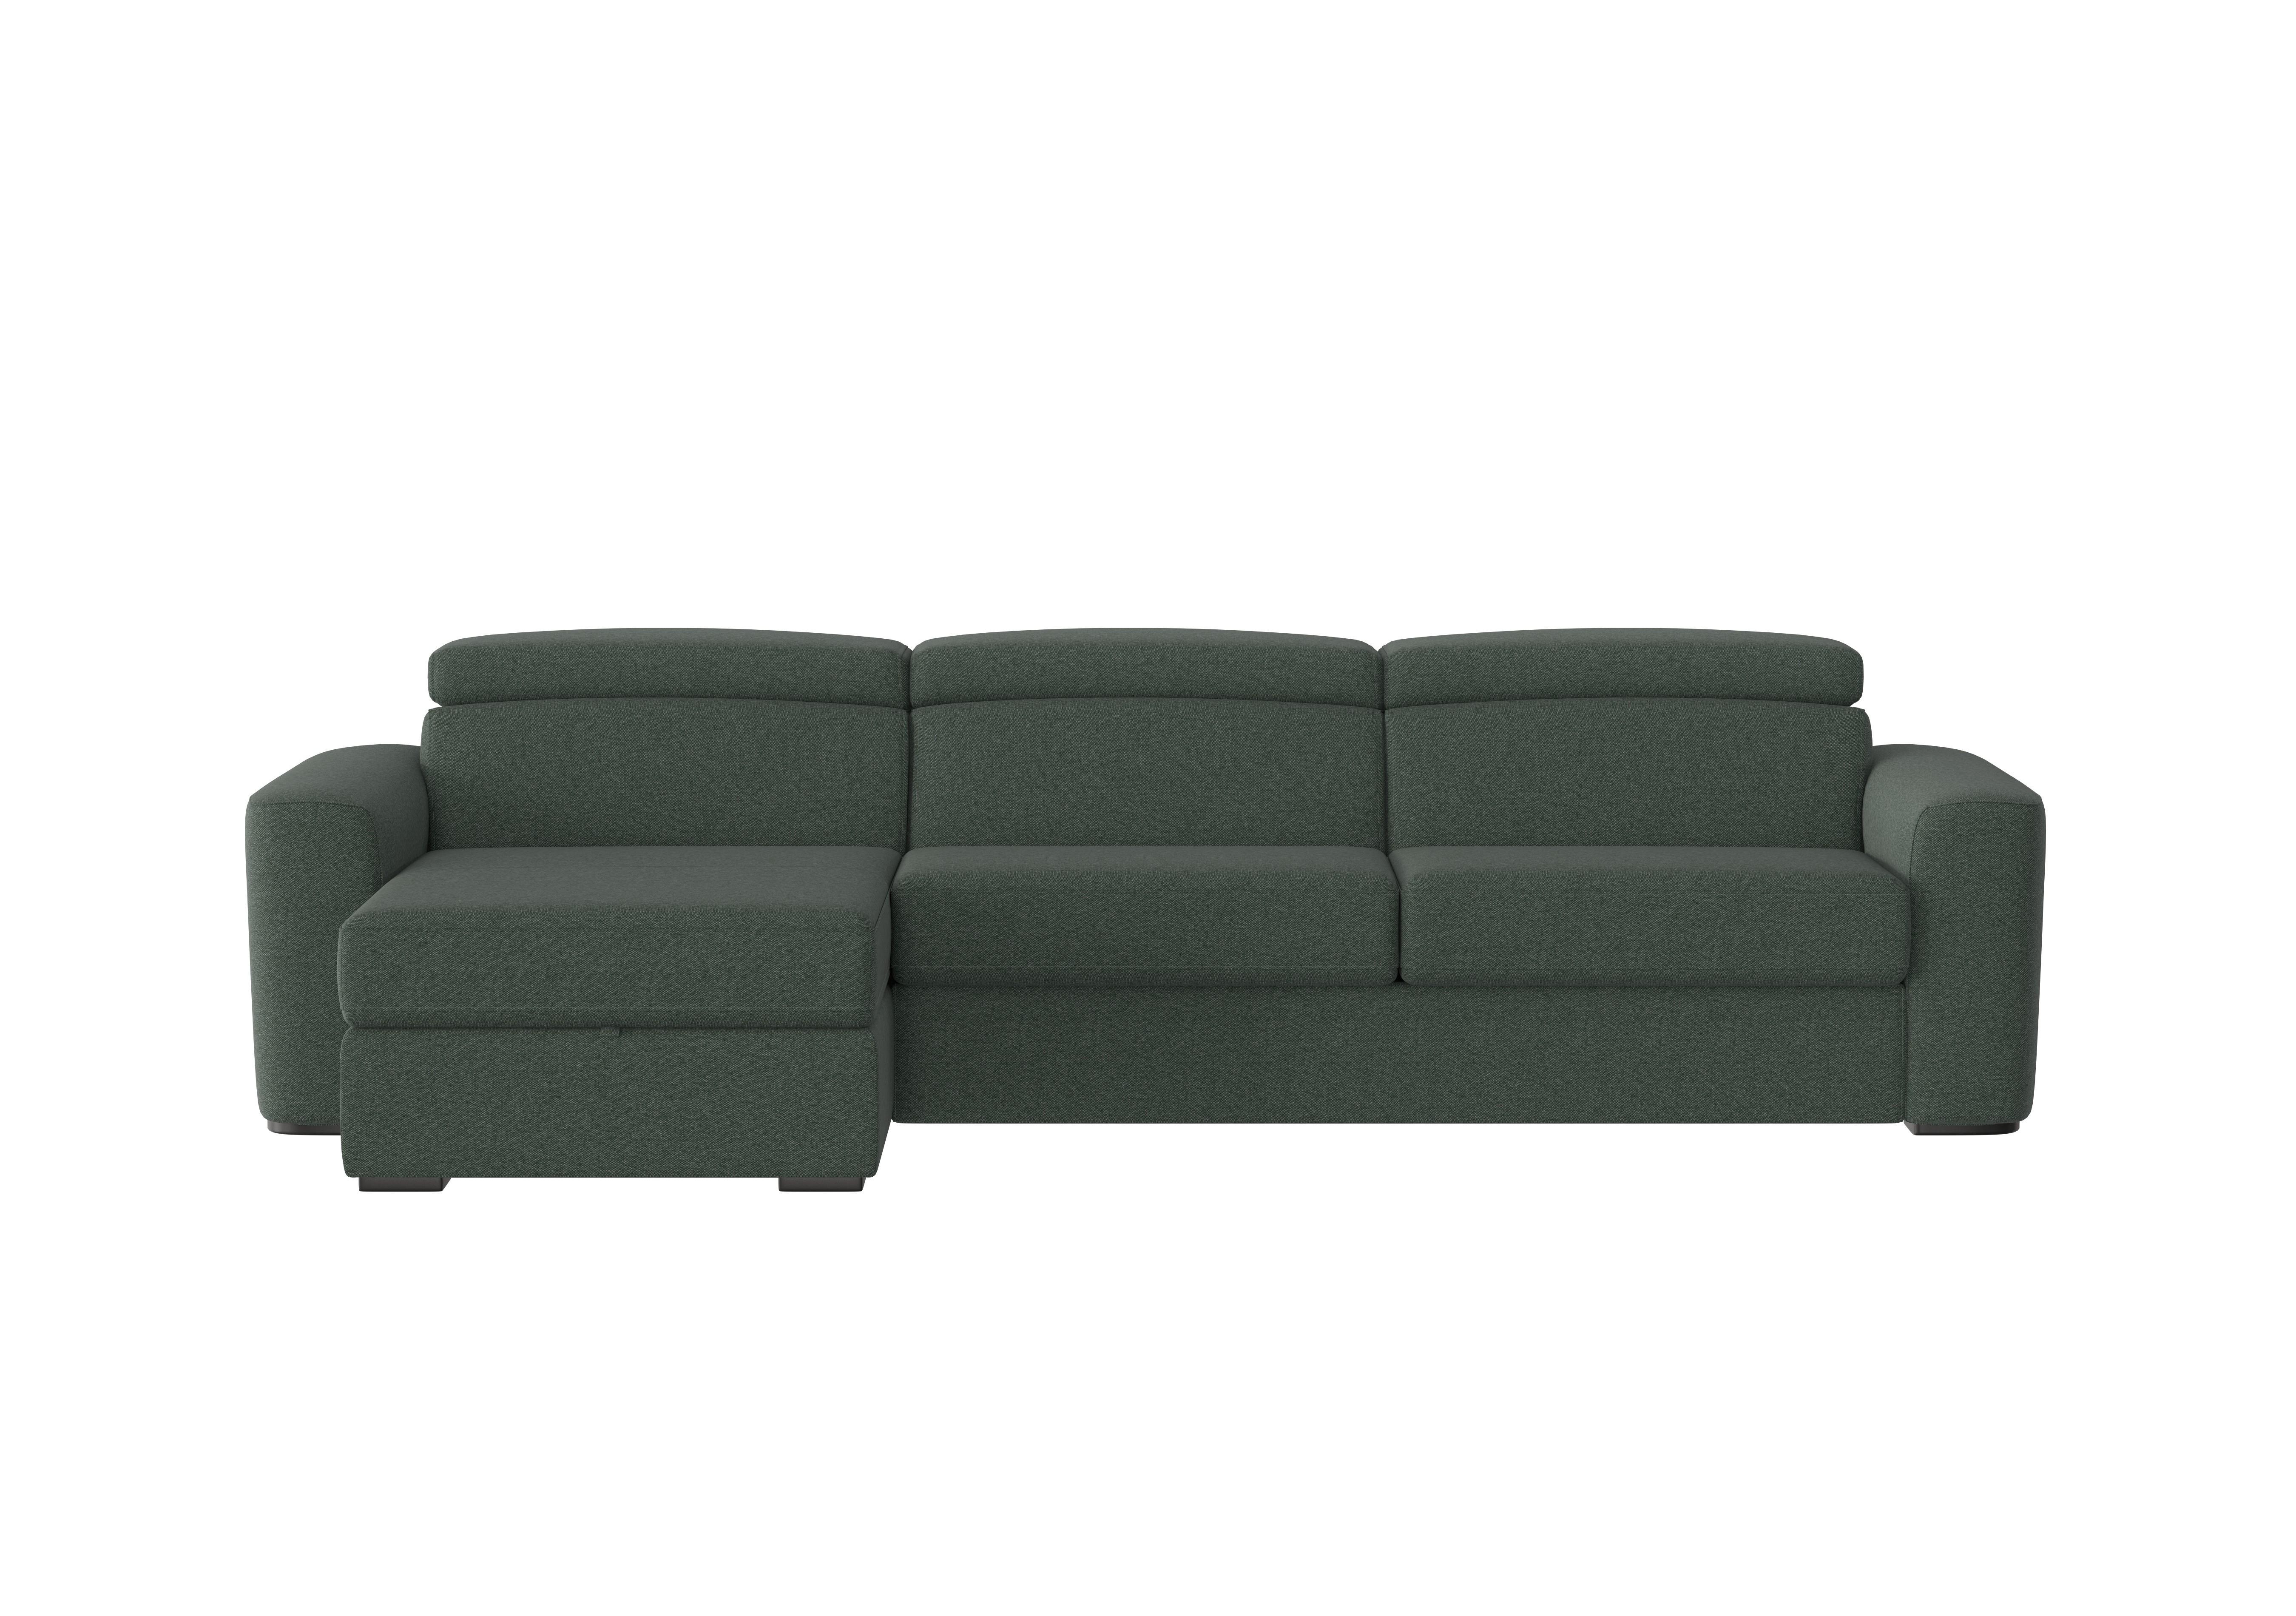 Infinity Fabric Corner Chaise Sofa Bed with Storage in Fab-Ska-R48 Moss Green on Furniture Village